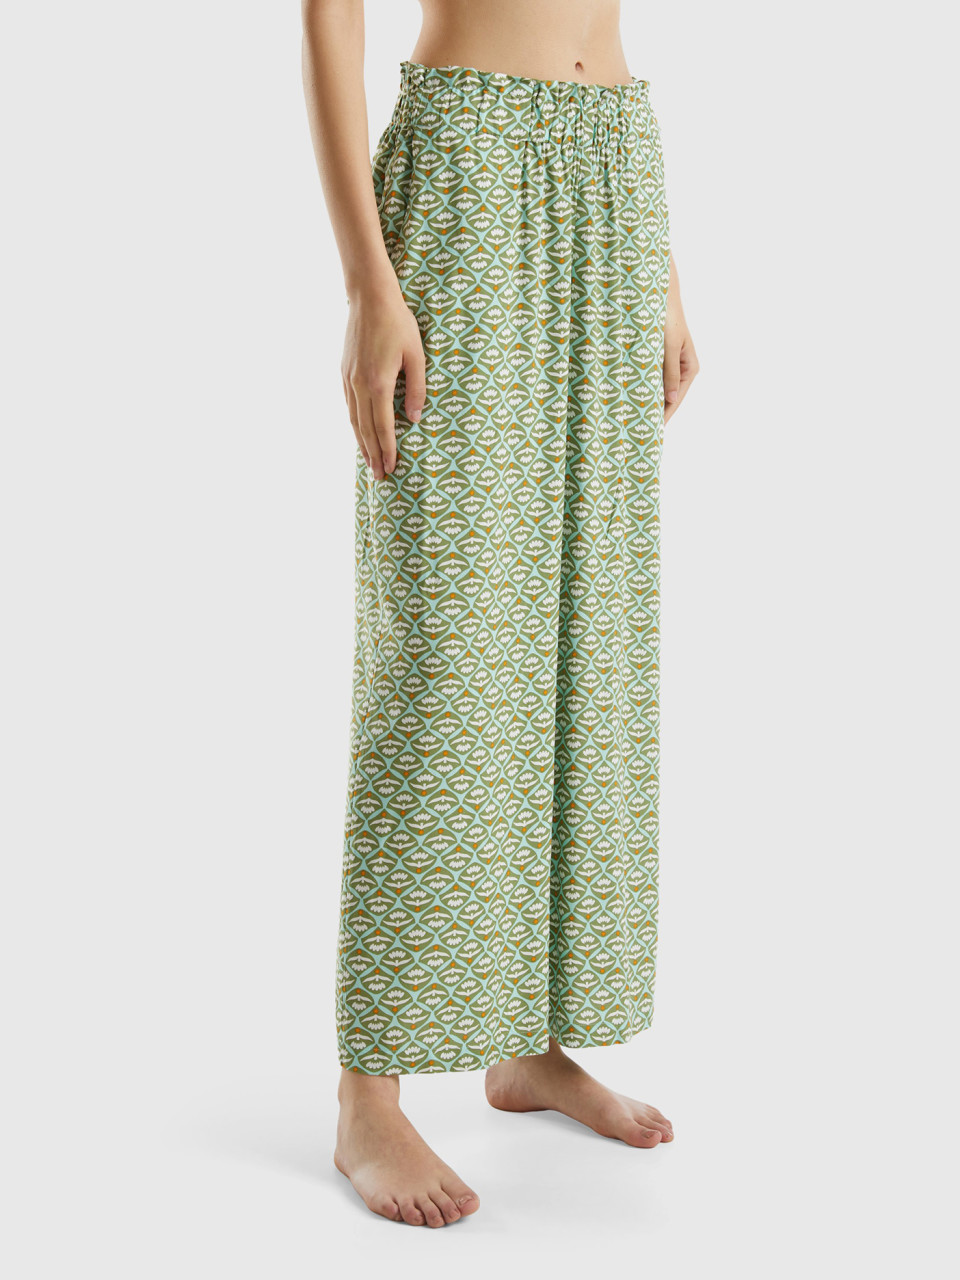 Benetton, Trousers With Floral Print, Military Green, Women